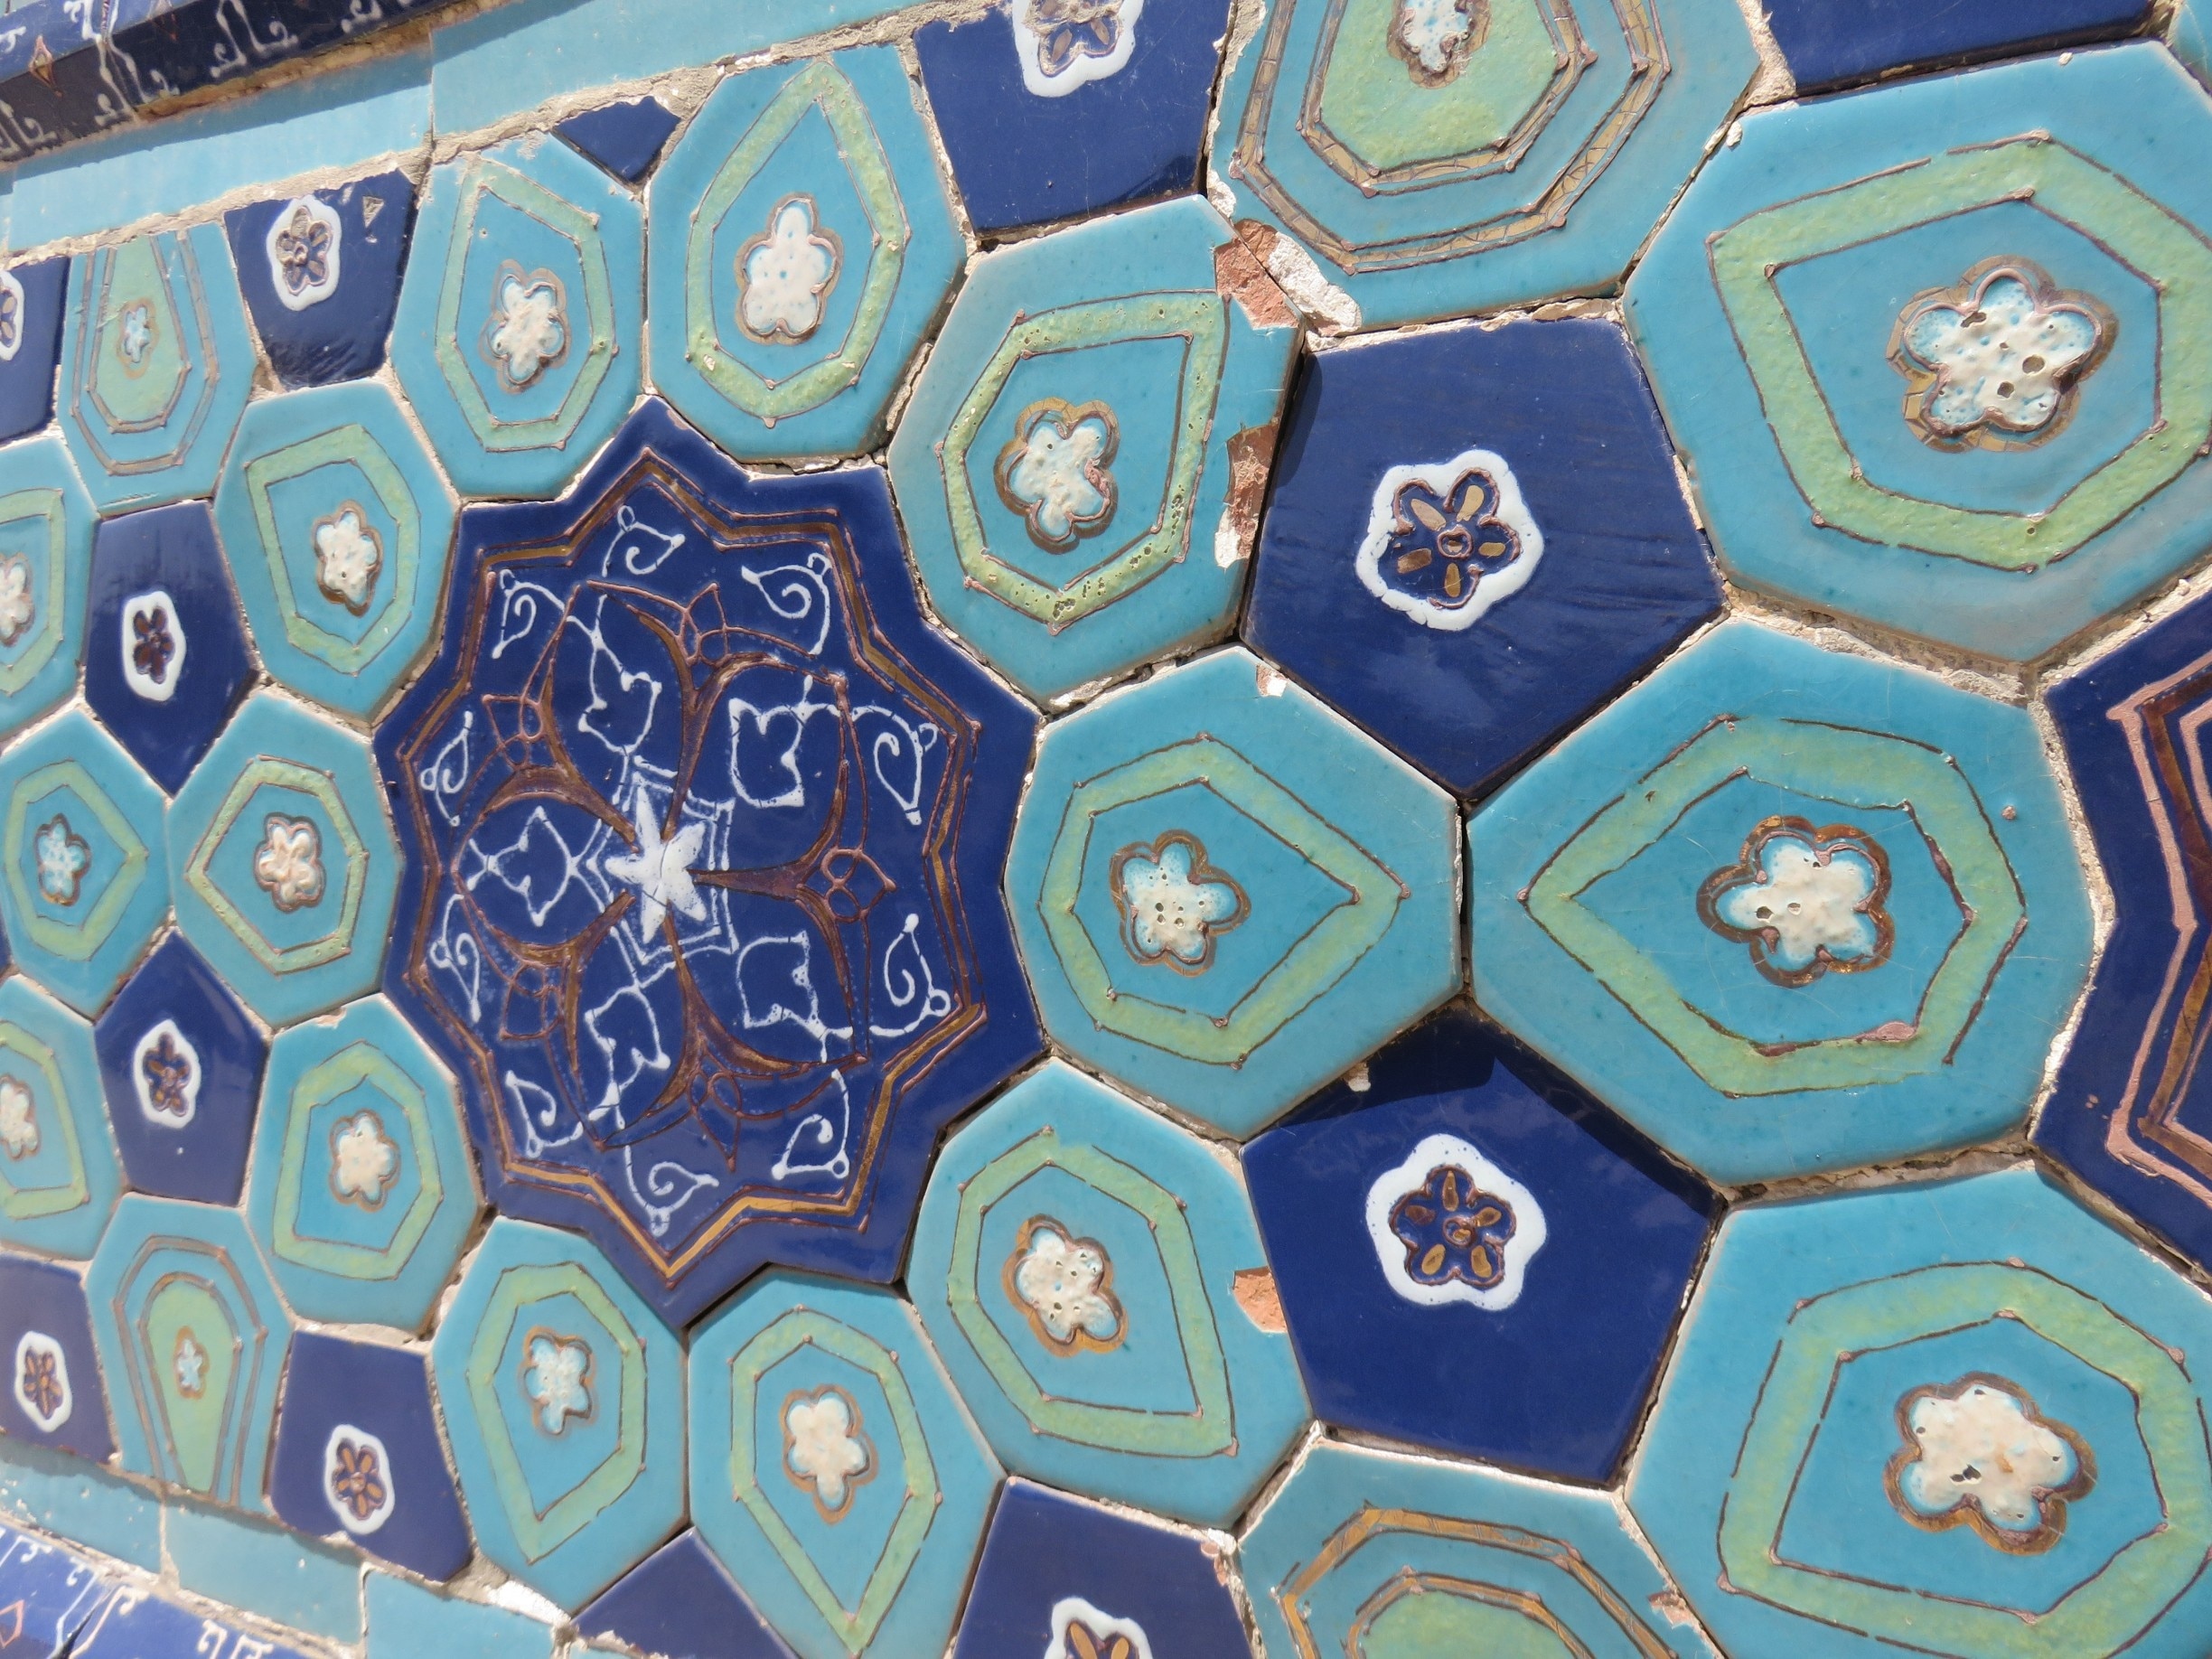 Each tile is an individual fit into the space that it occupies. This must be a huge challenge when modern day artisans replace them, using the techniques that are centuries old. That in itself makes this place incredible. #Details